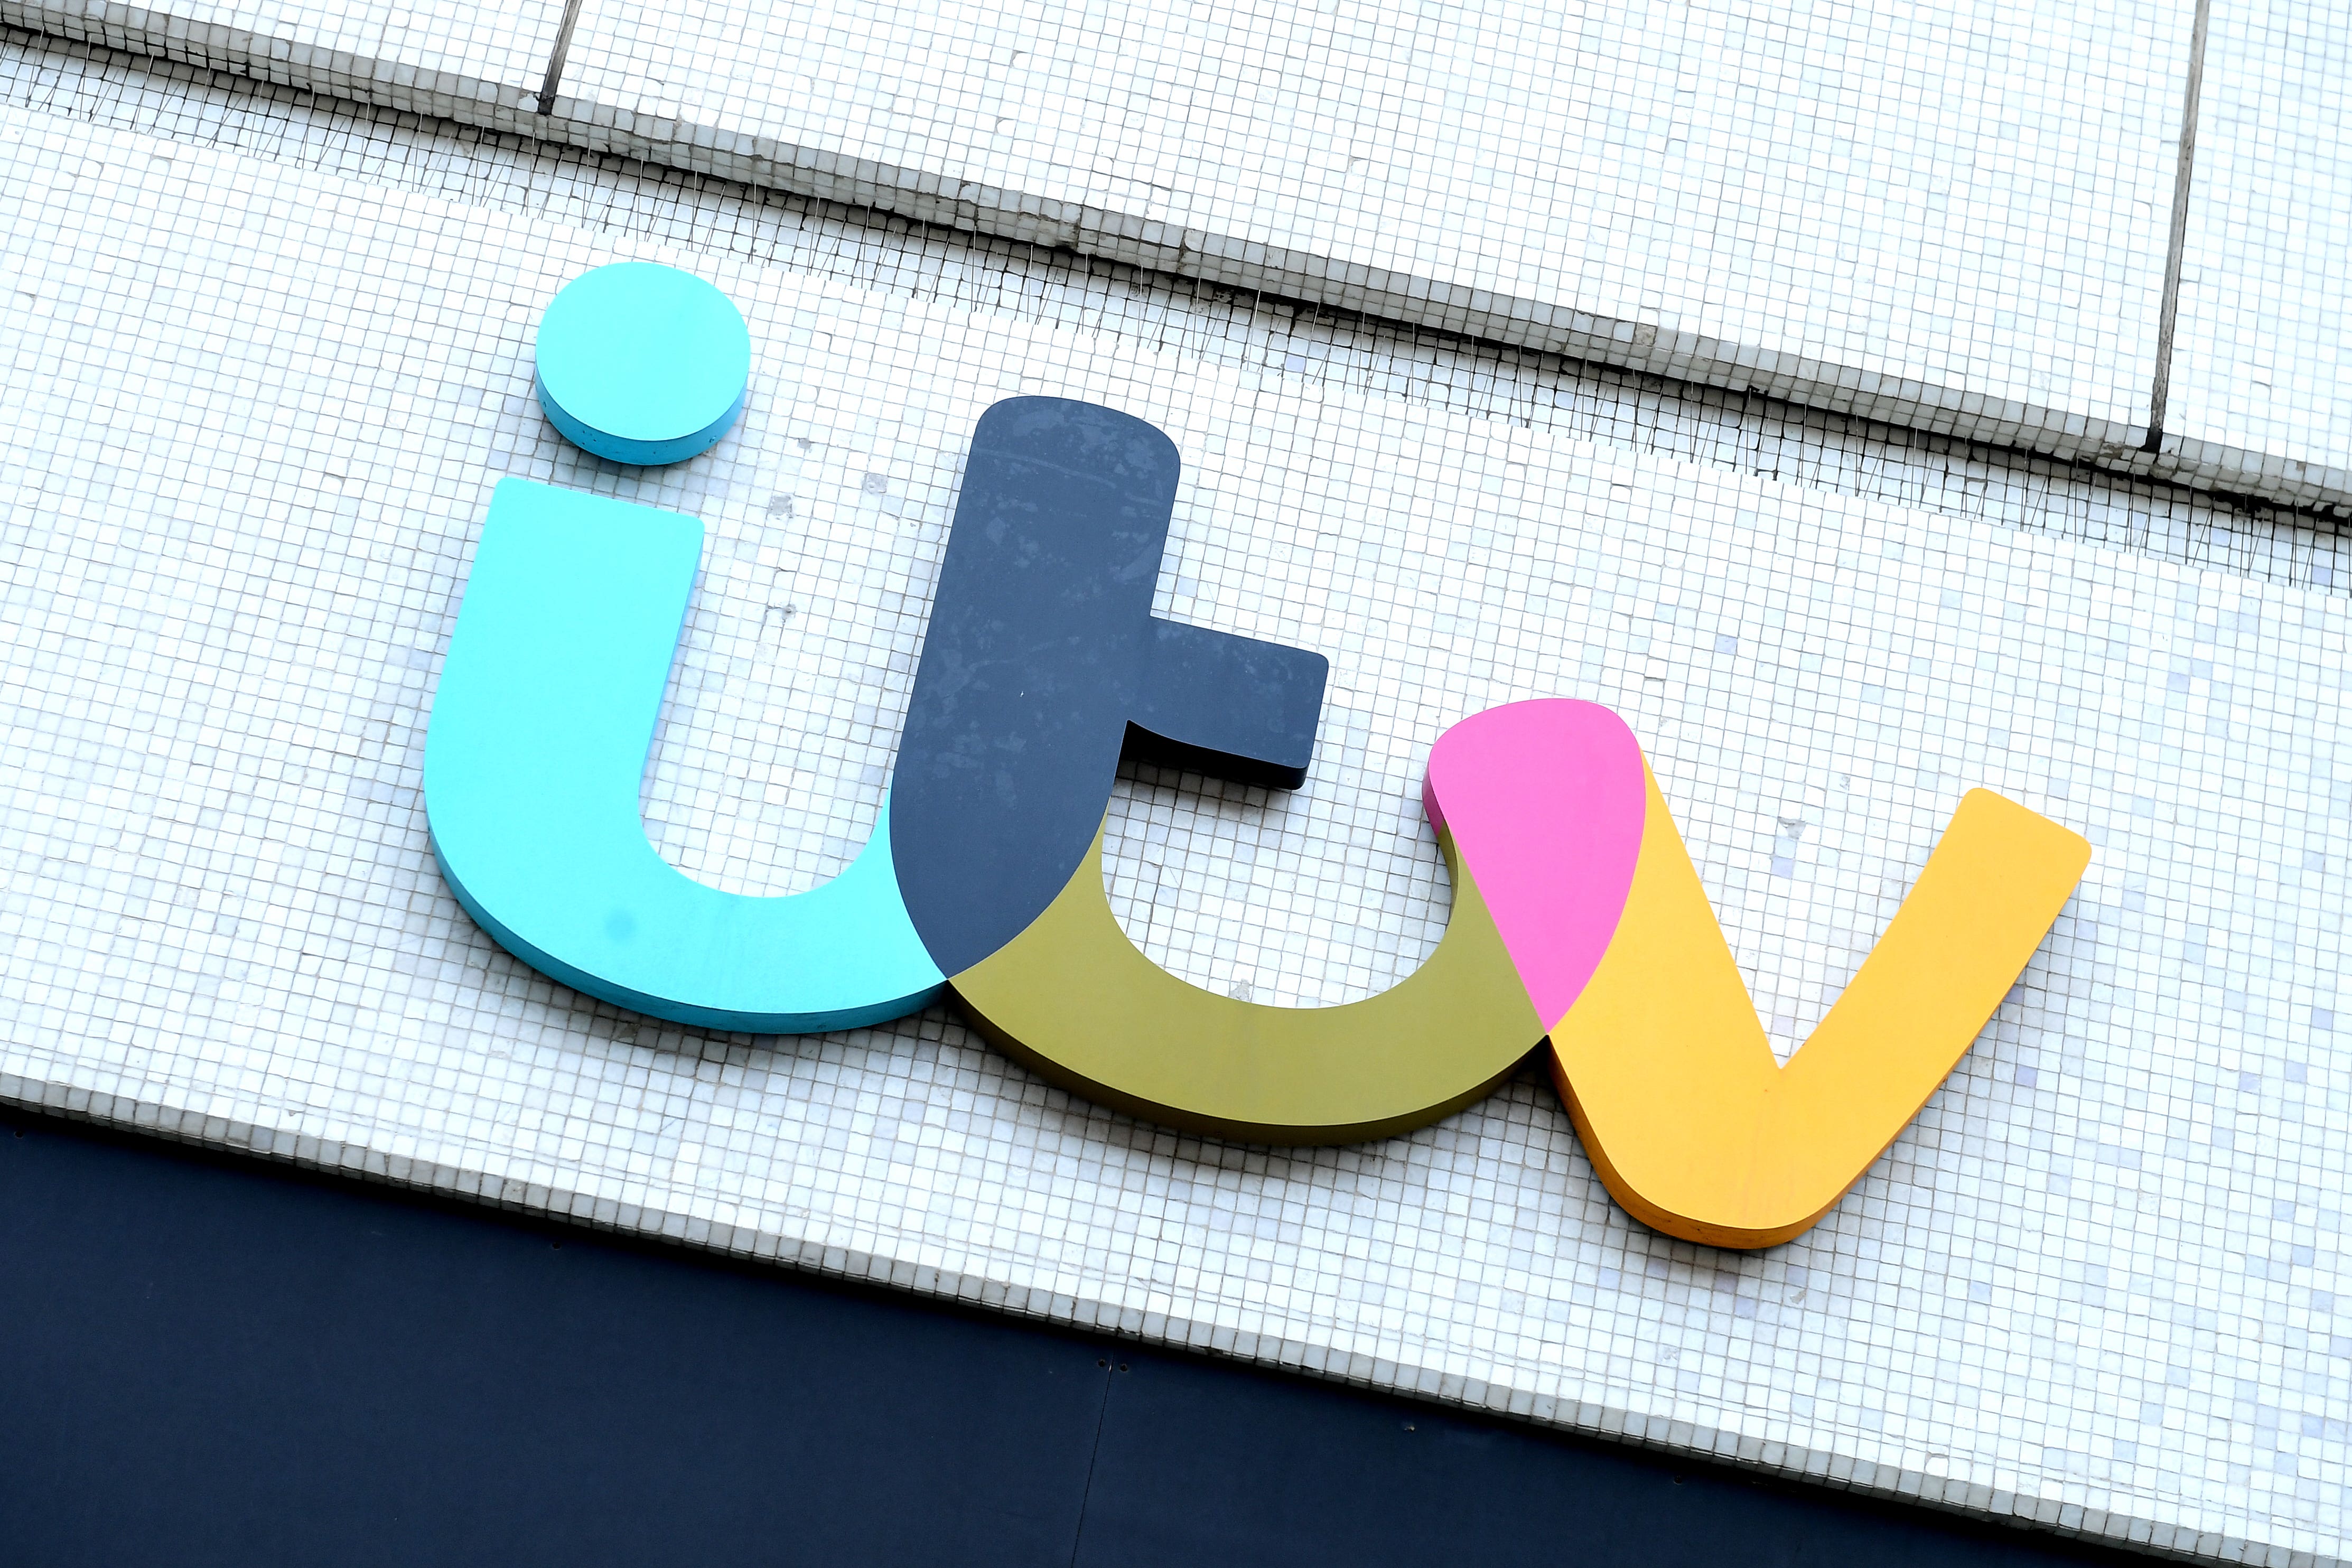 Broadcaster ITV has revealed a 10% drop in advertising revenues at the start of 2023 and warned trading will get tougher in the second quarter as firms rein in marketing spend against a difficult wider economic backdrop.